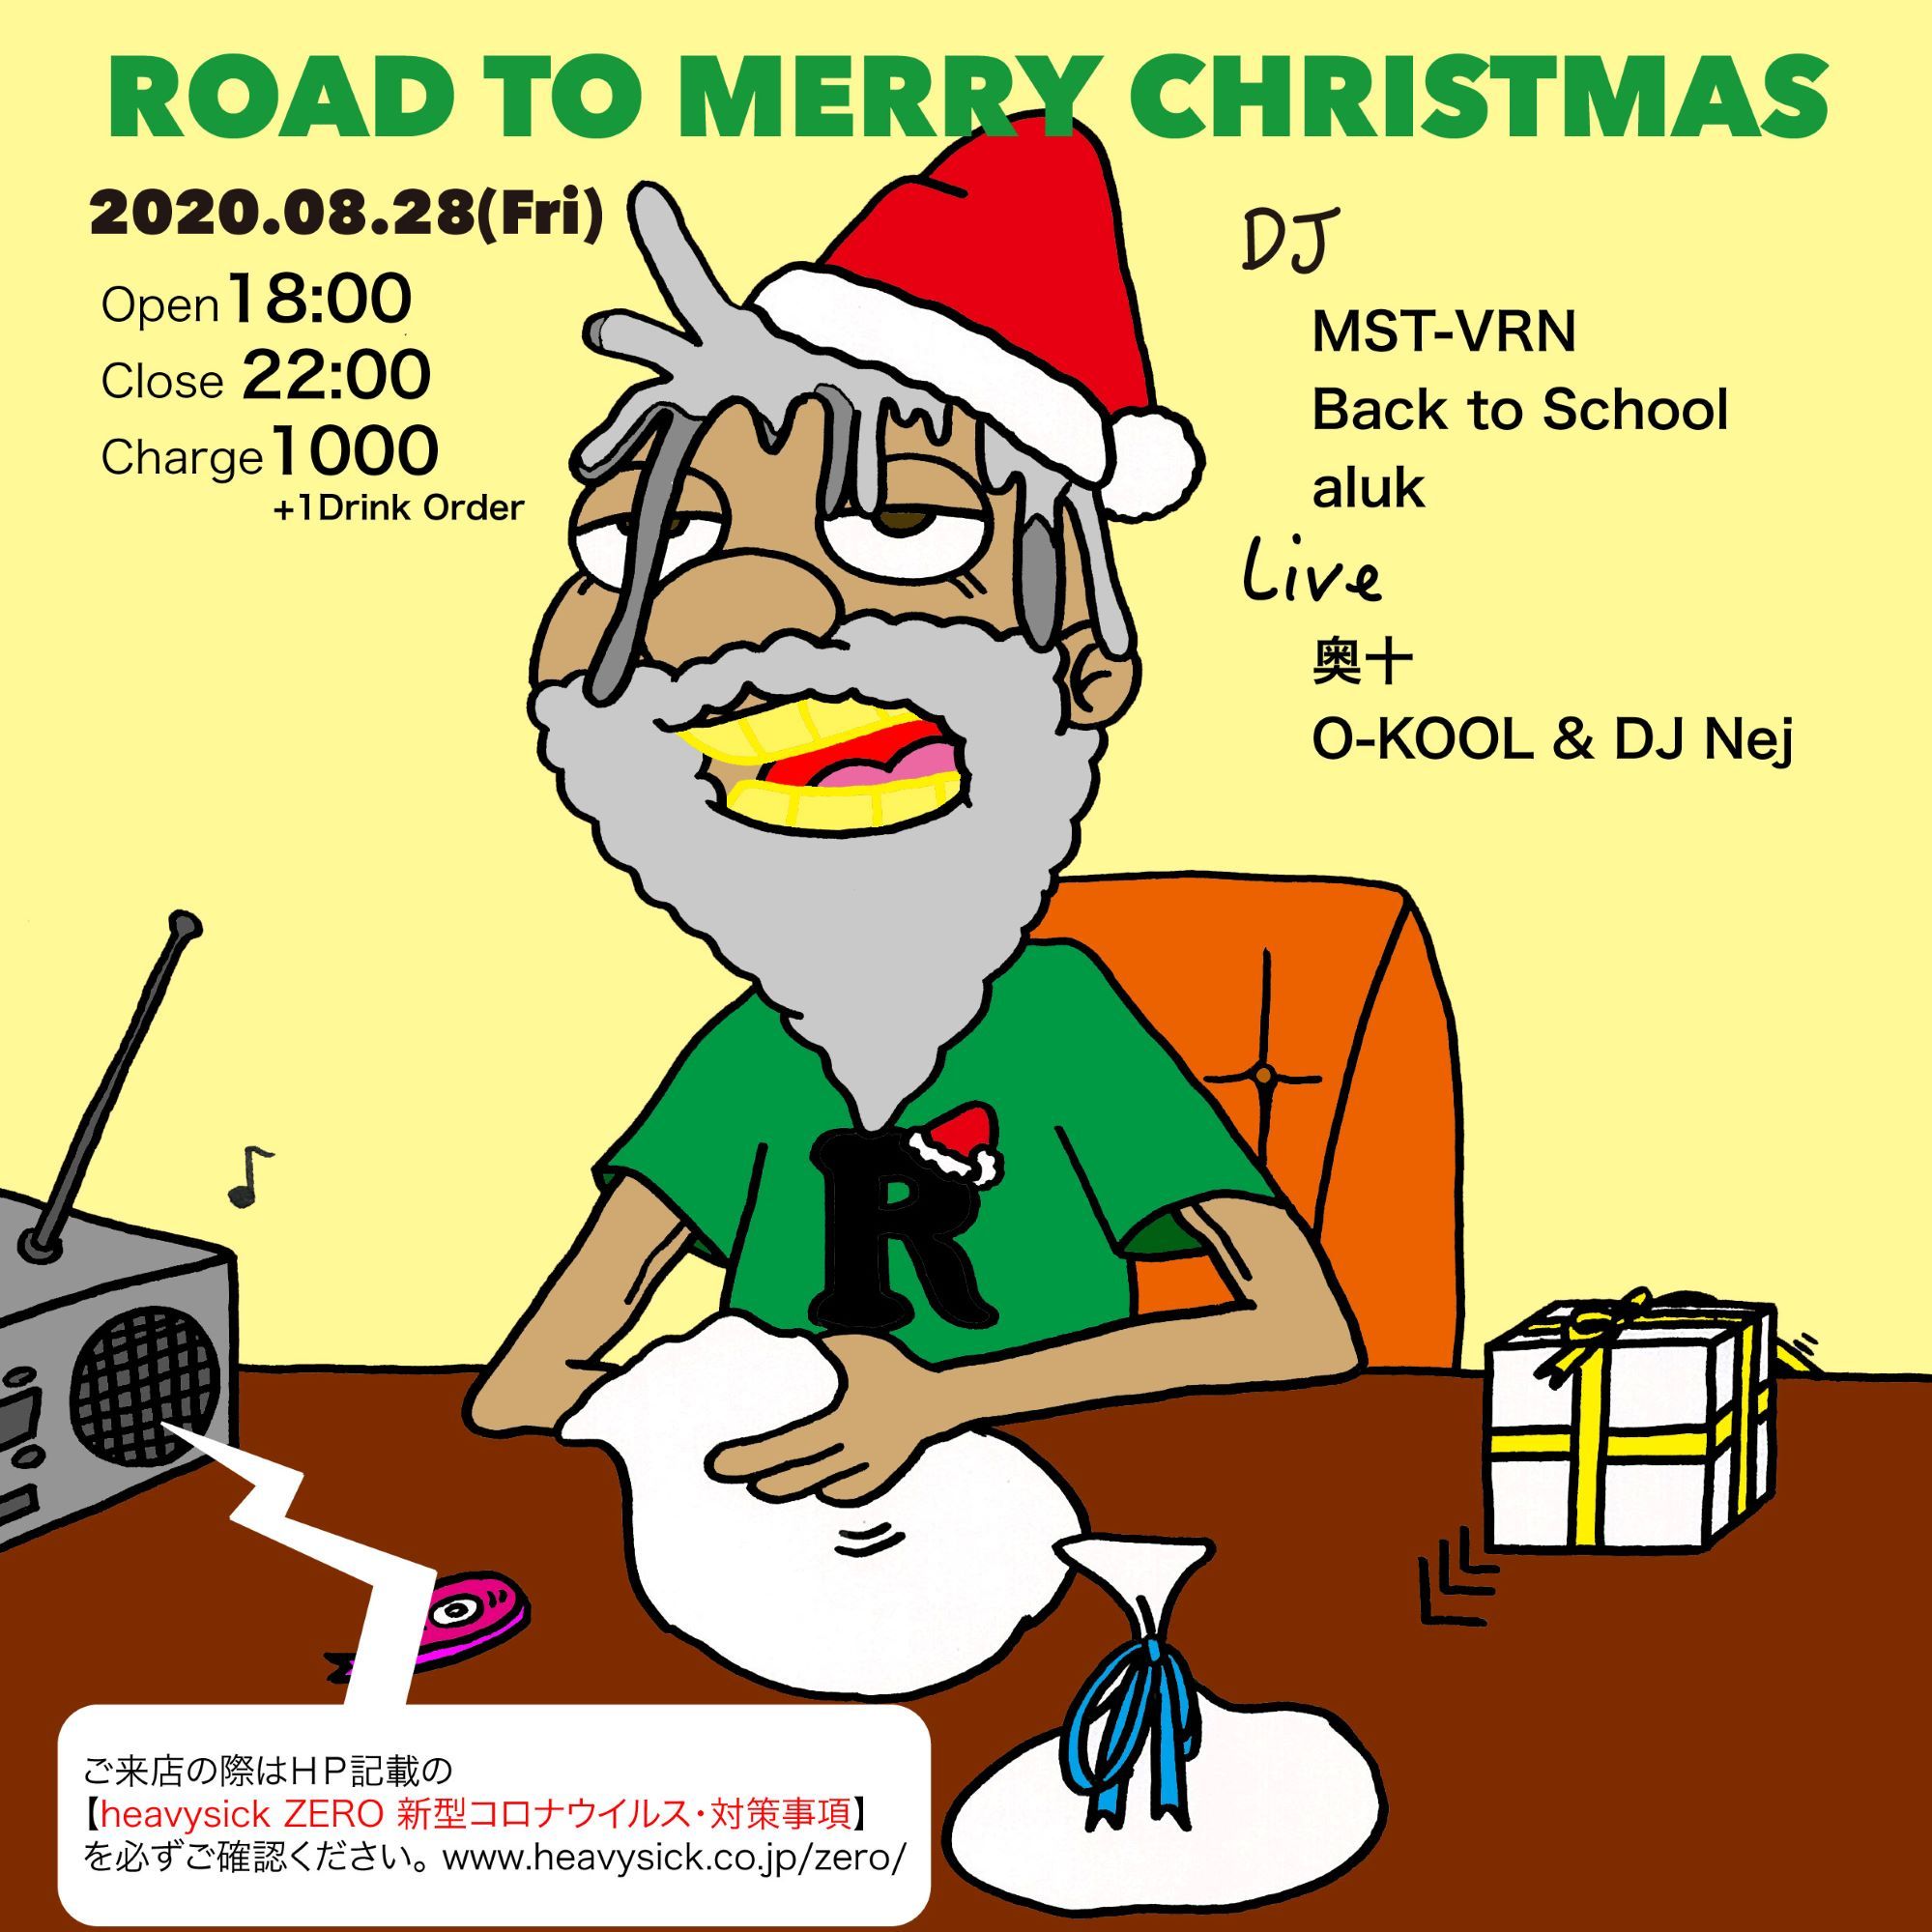 Road To Merry Christmas 2020